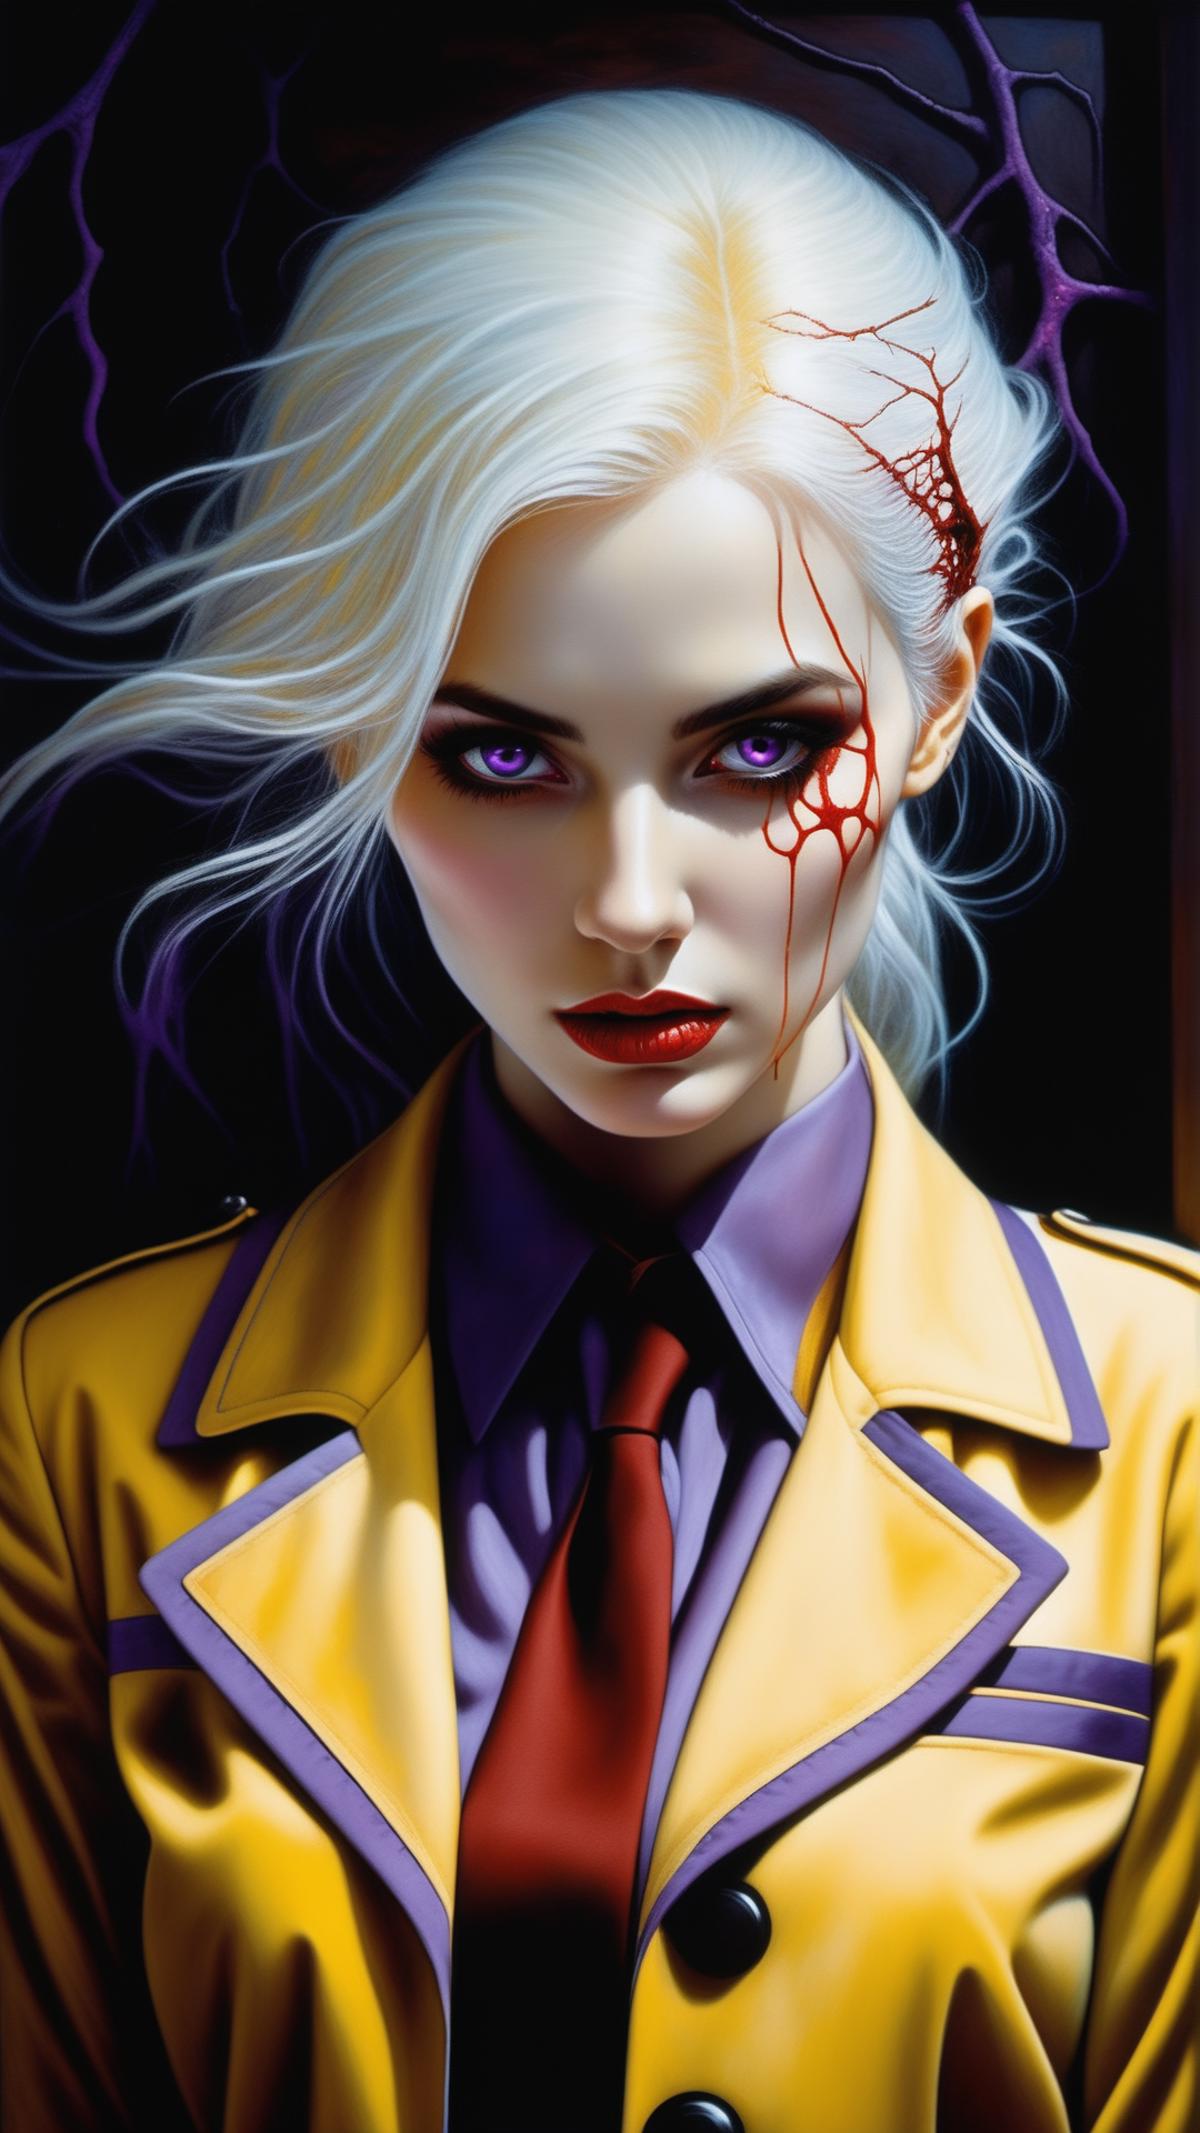 A woman with purple eyes and a purple tie in a yellow jacket.